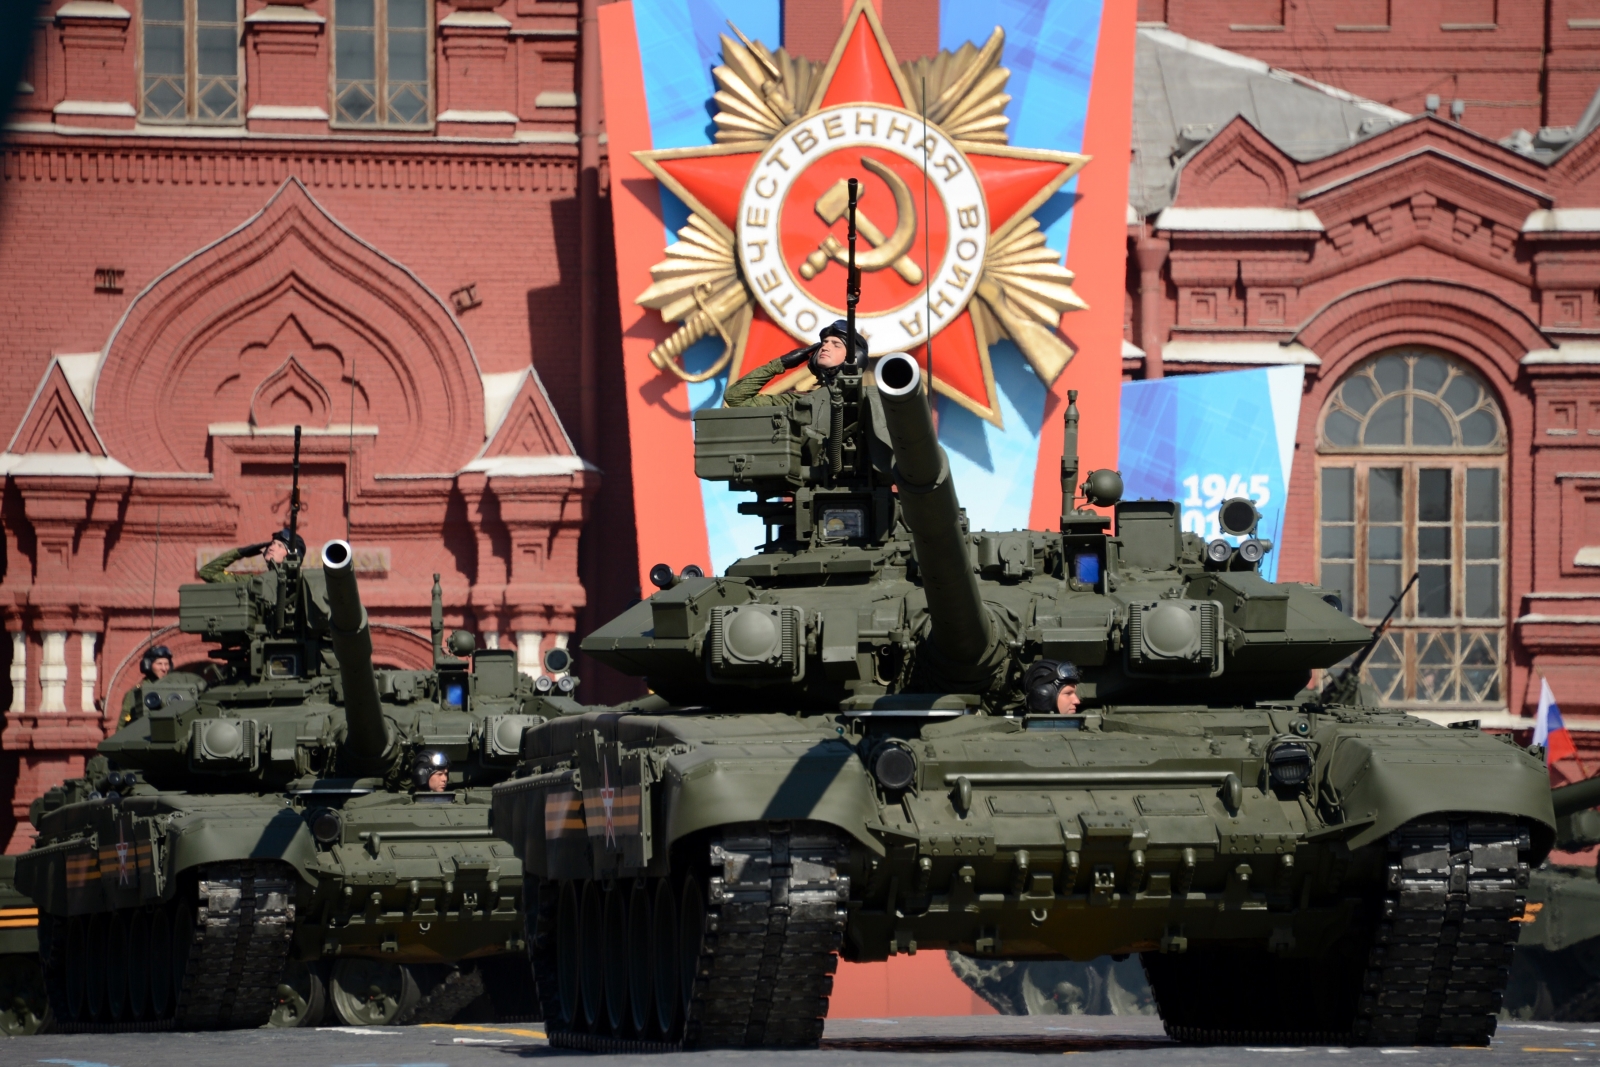 tanks-lasy-years-victory-day-parade-moscow-afp.jpg